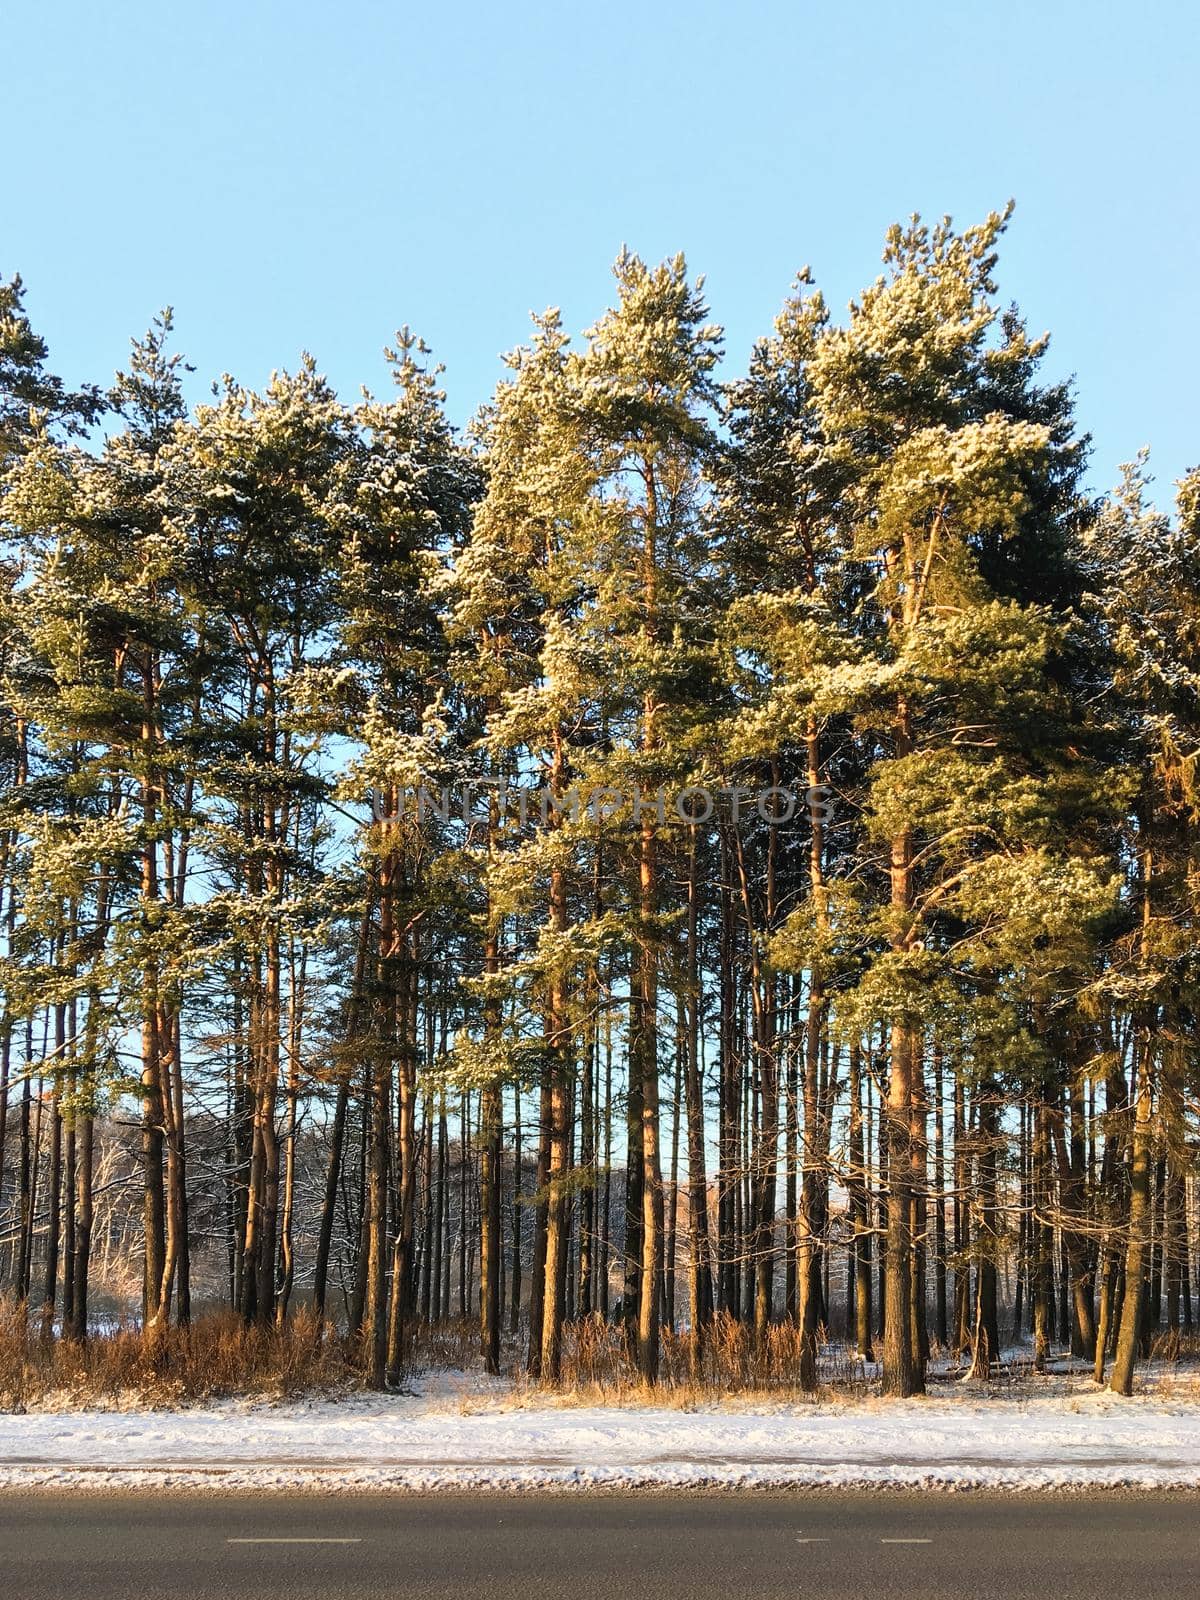 High pine trees grow along countryside road. Rural landscape with trees near asphalt road bed. Sunny winter day.